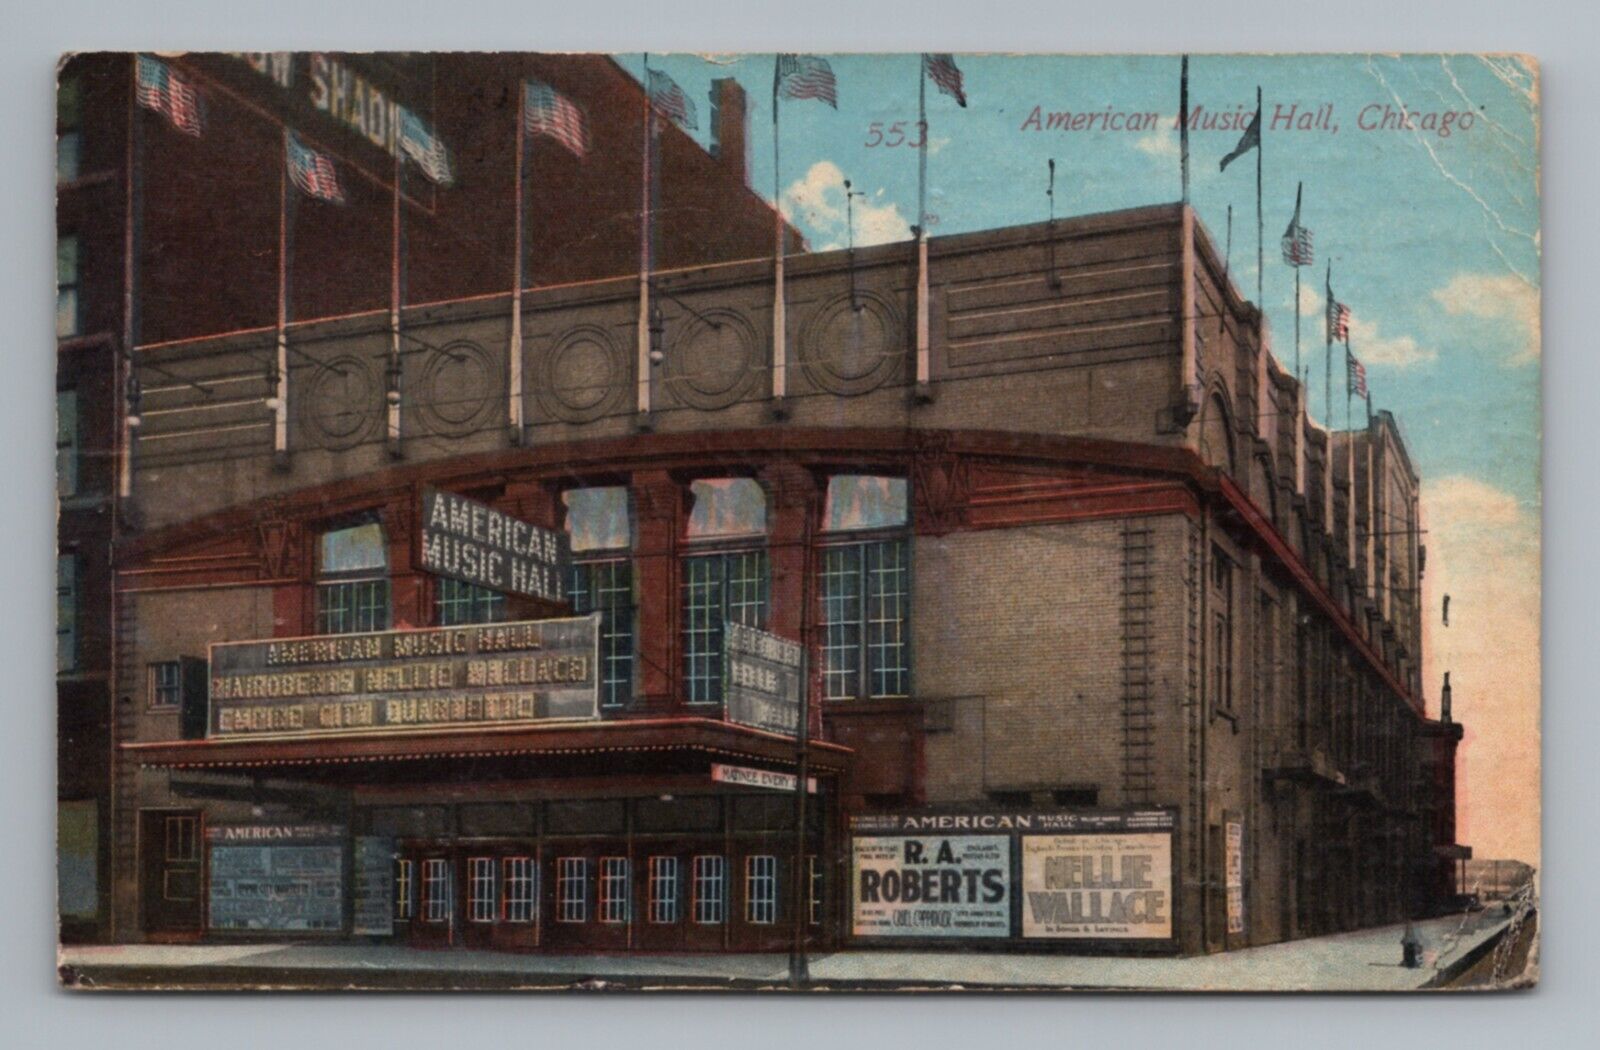 1915 American Music Hall Chicago Illinois RA Roberts Nellie Wallace Postcard